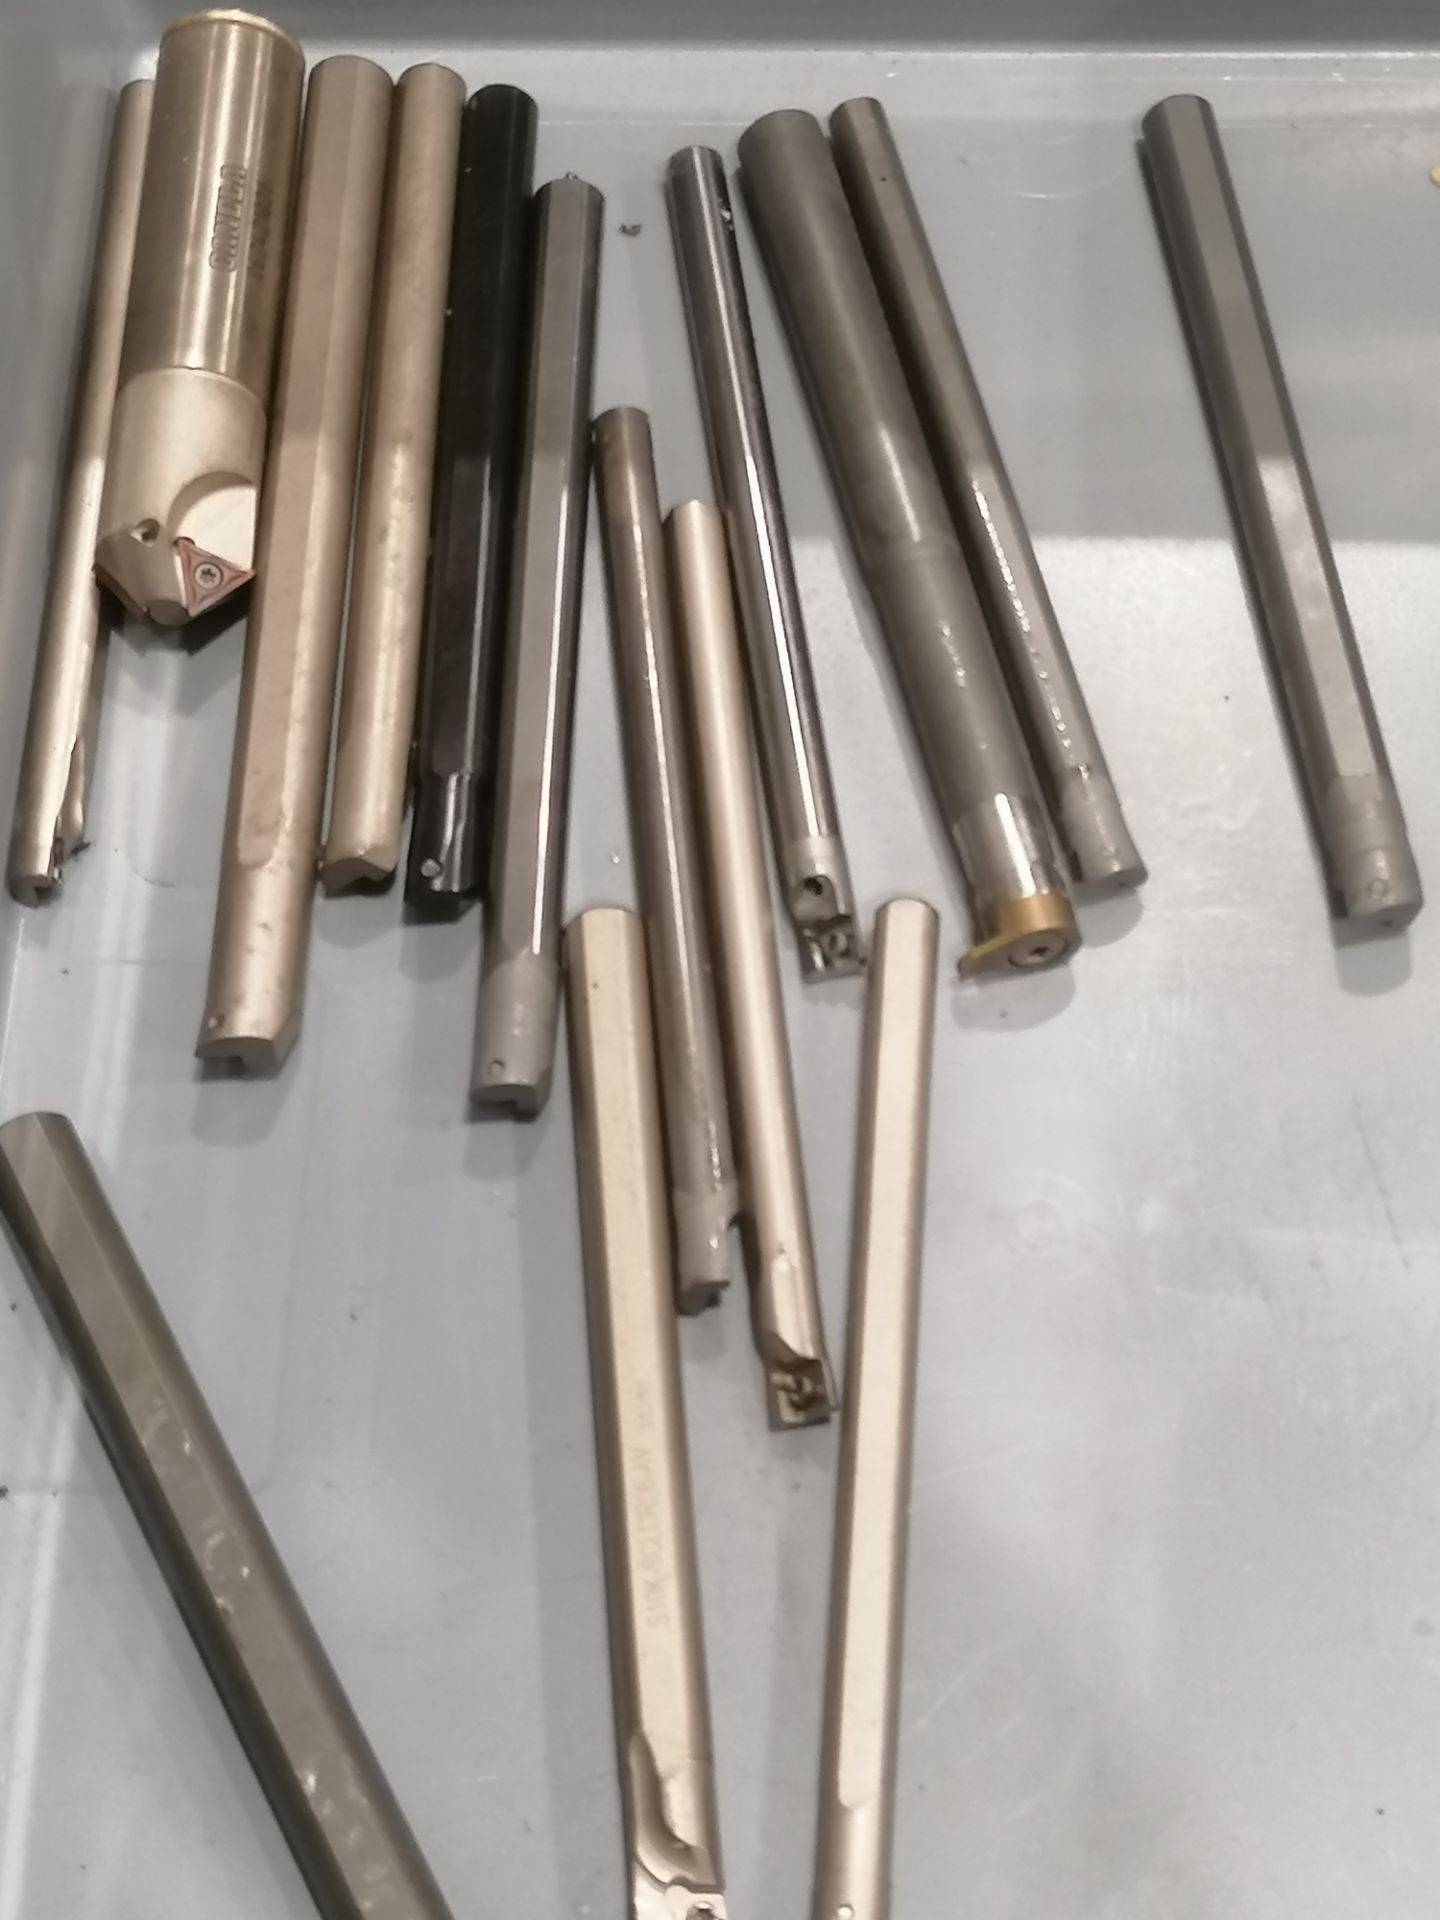 Carbide Boring Bars (Various Sizes) (Please Note: Plastic Container Boxes Are Not Included) - Image 5 of 6